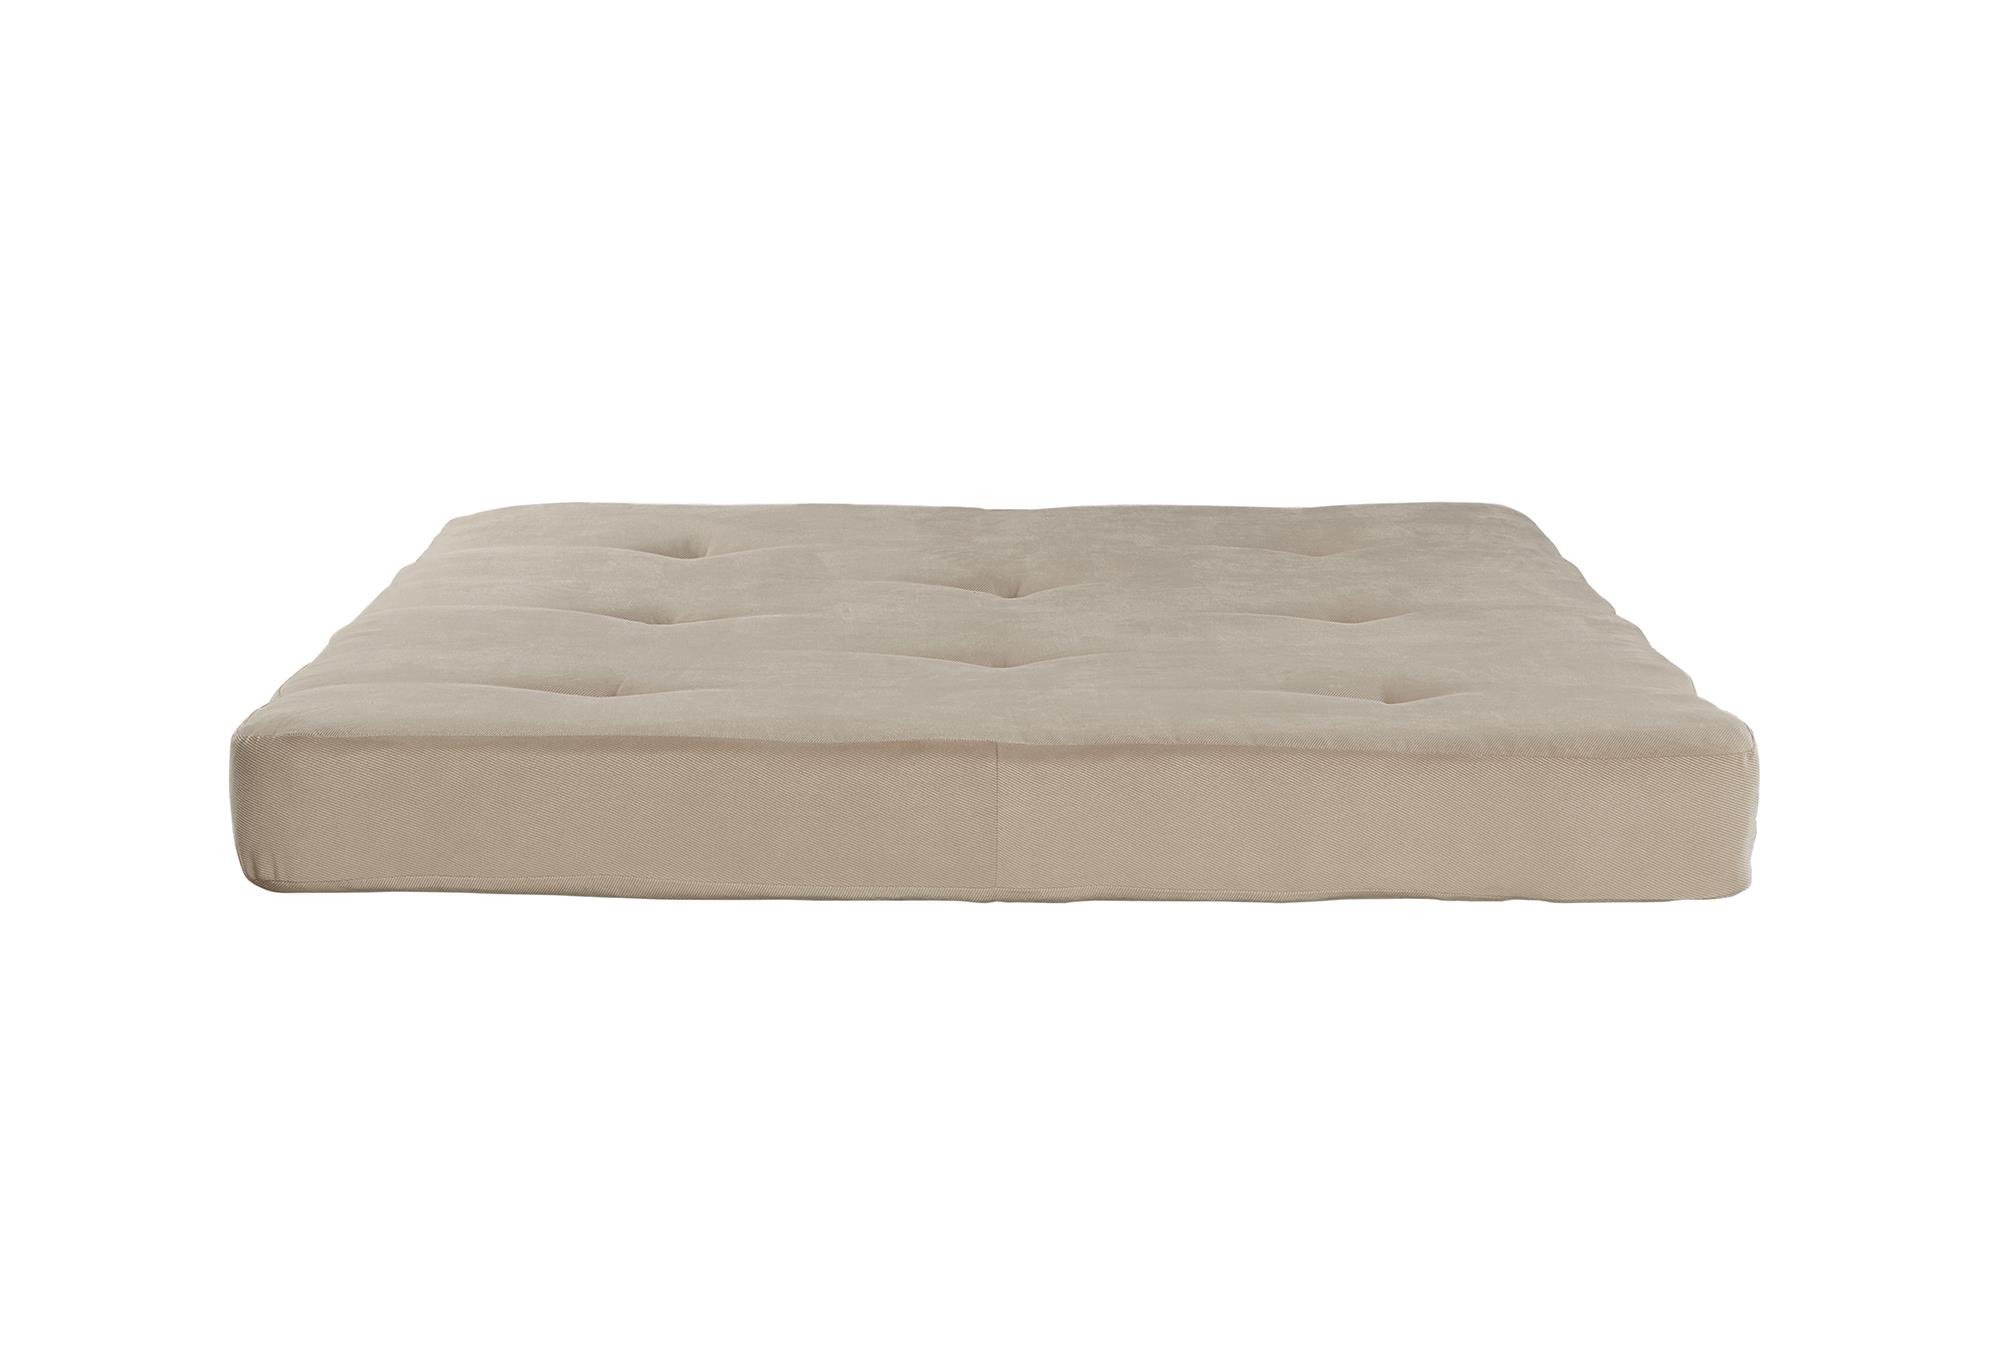 Kali 6 Inch Futon Mattress with Tufted Cover and Recycled Polyester Fill, Full, Tan Microfiber (Frame not Included) - image 1 of 16